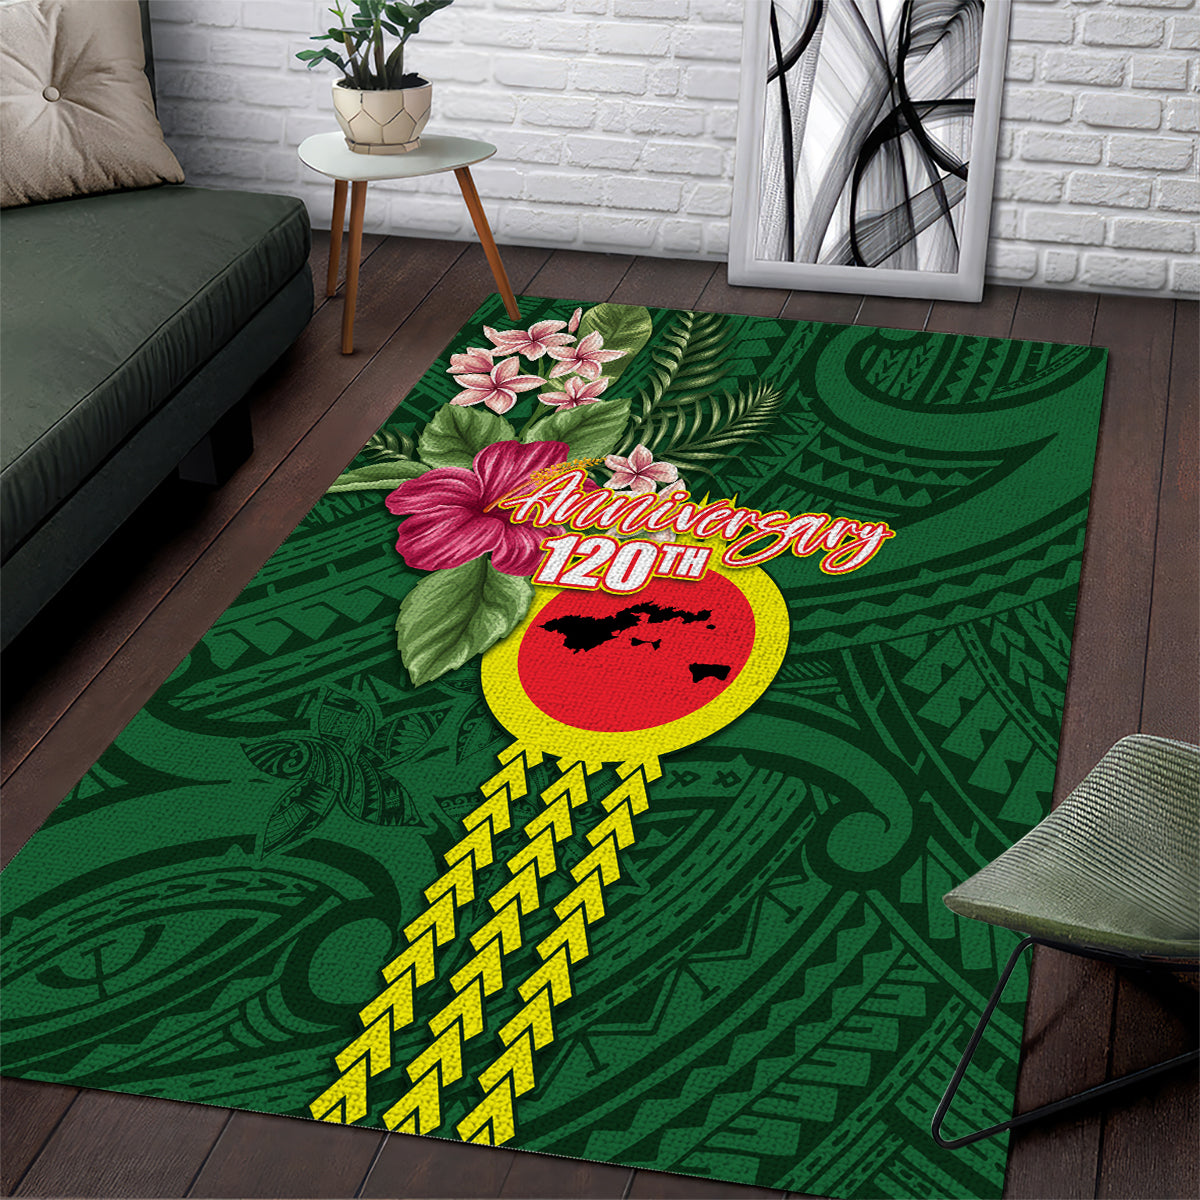 Manu'a Cession Day 120th Anniversary Area Rug Polynesian Pattern and Hibiscus Flower